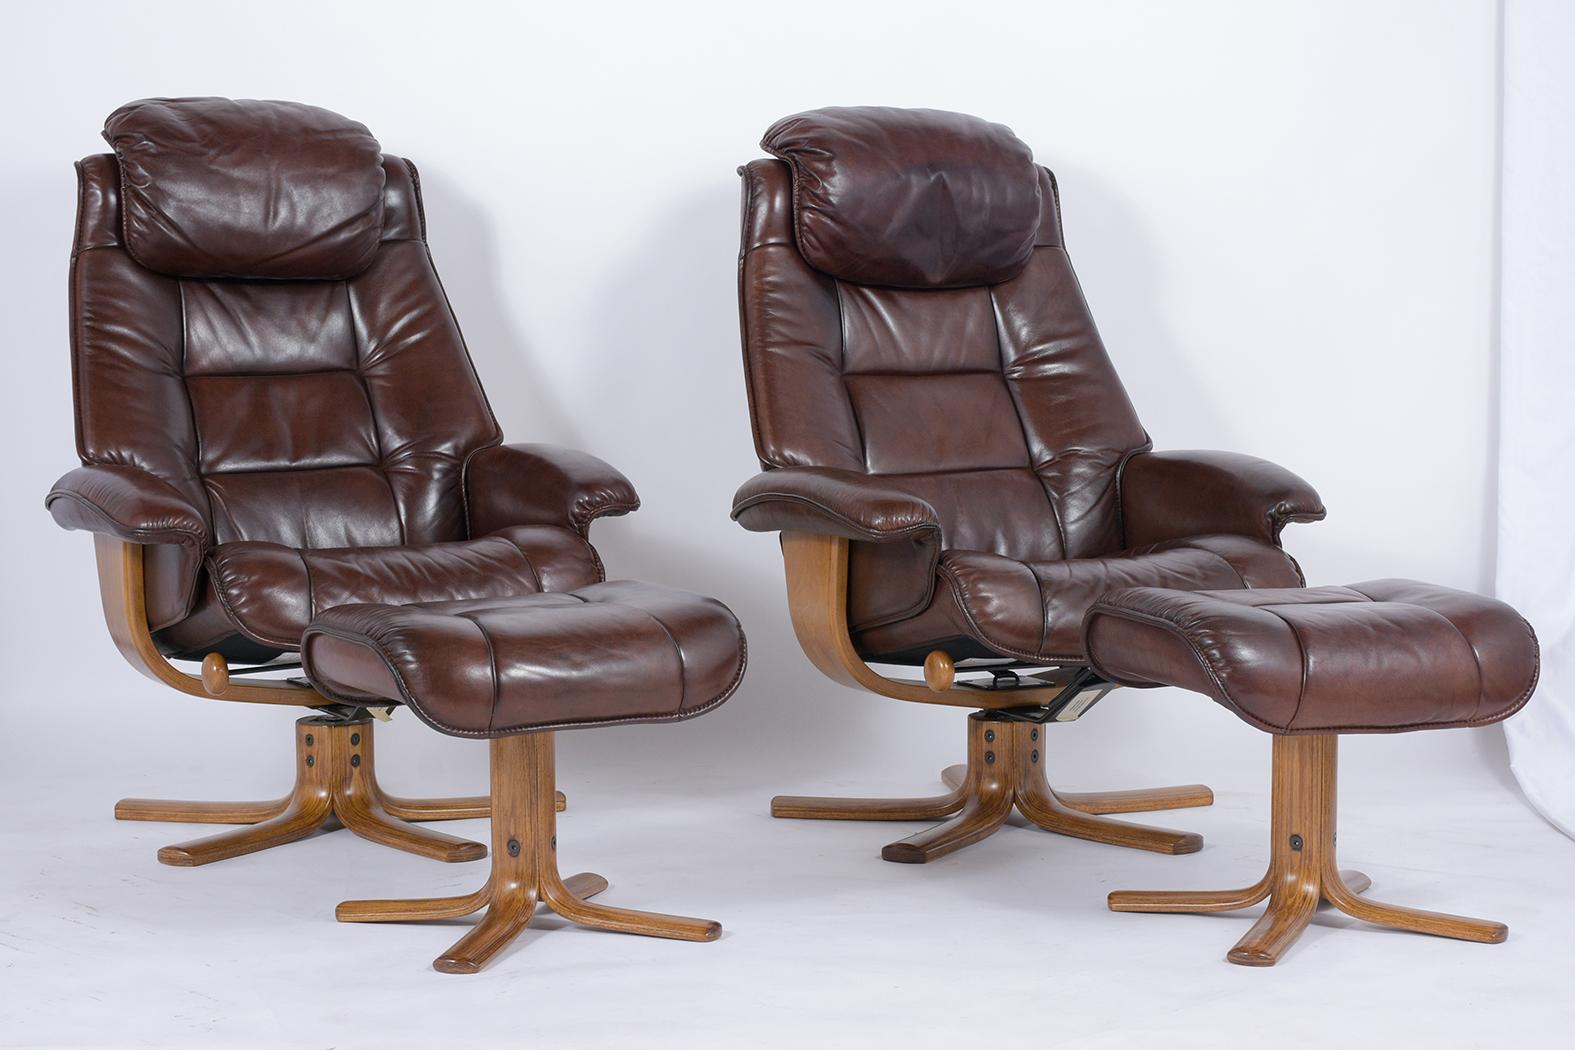 Delve into the epitome of Danish design with our Vintage Mid-Century Lounge Chair and Ottoman Set, expertly restored for modern elegance. Upholstered in original leather, now dyed to a sumptuous dark brown, this set is the work of our master